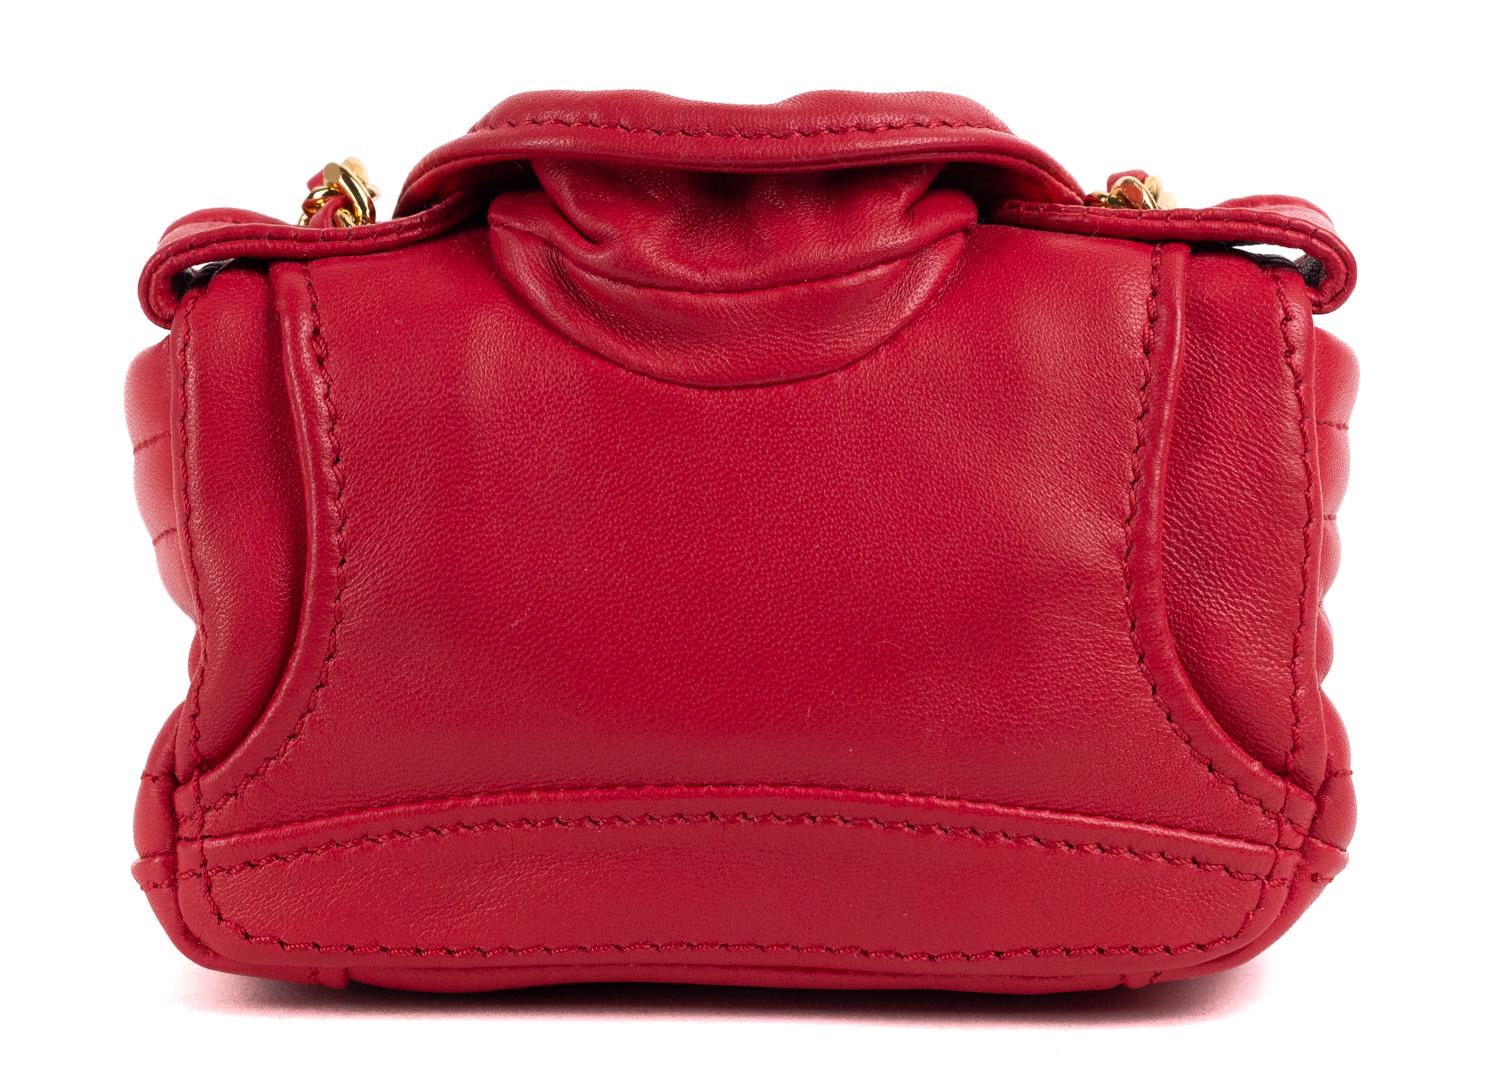 Moschino Red Leather Mini Moto Jacket Chain Shoulder Bag In New Condition For Sale In Brooklyn, NY